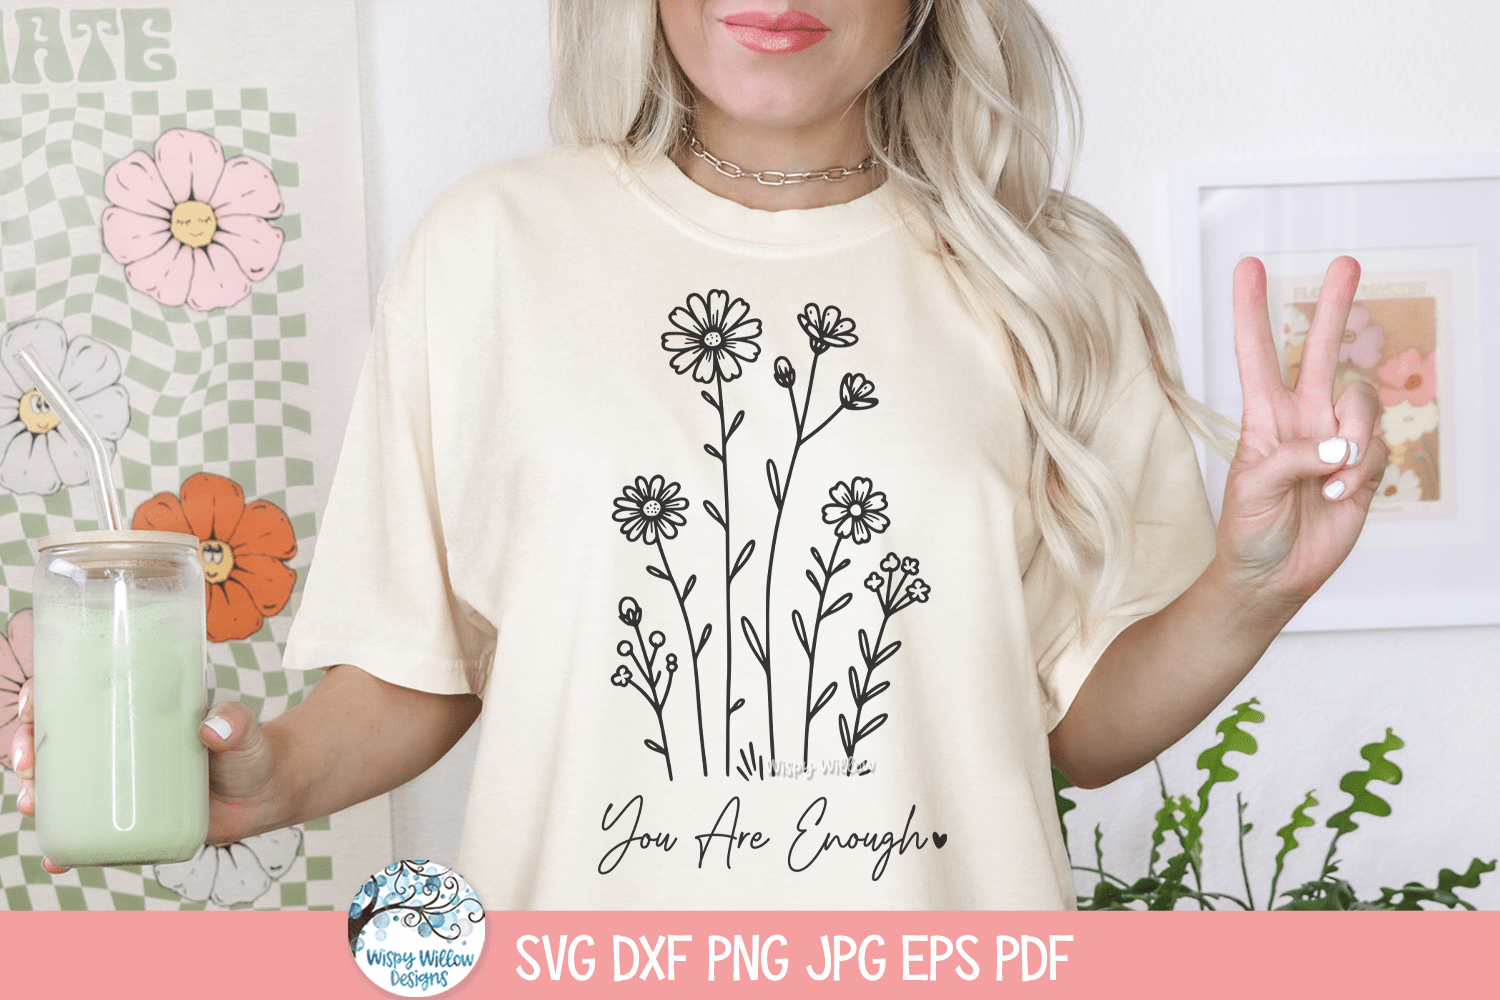 You Are Enough SVG | Motivational Apparel Wispy Willow Designs Company